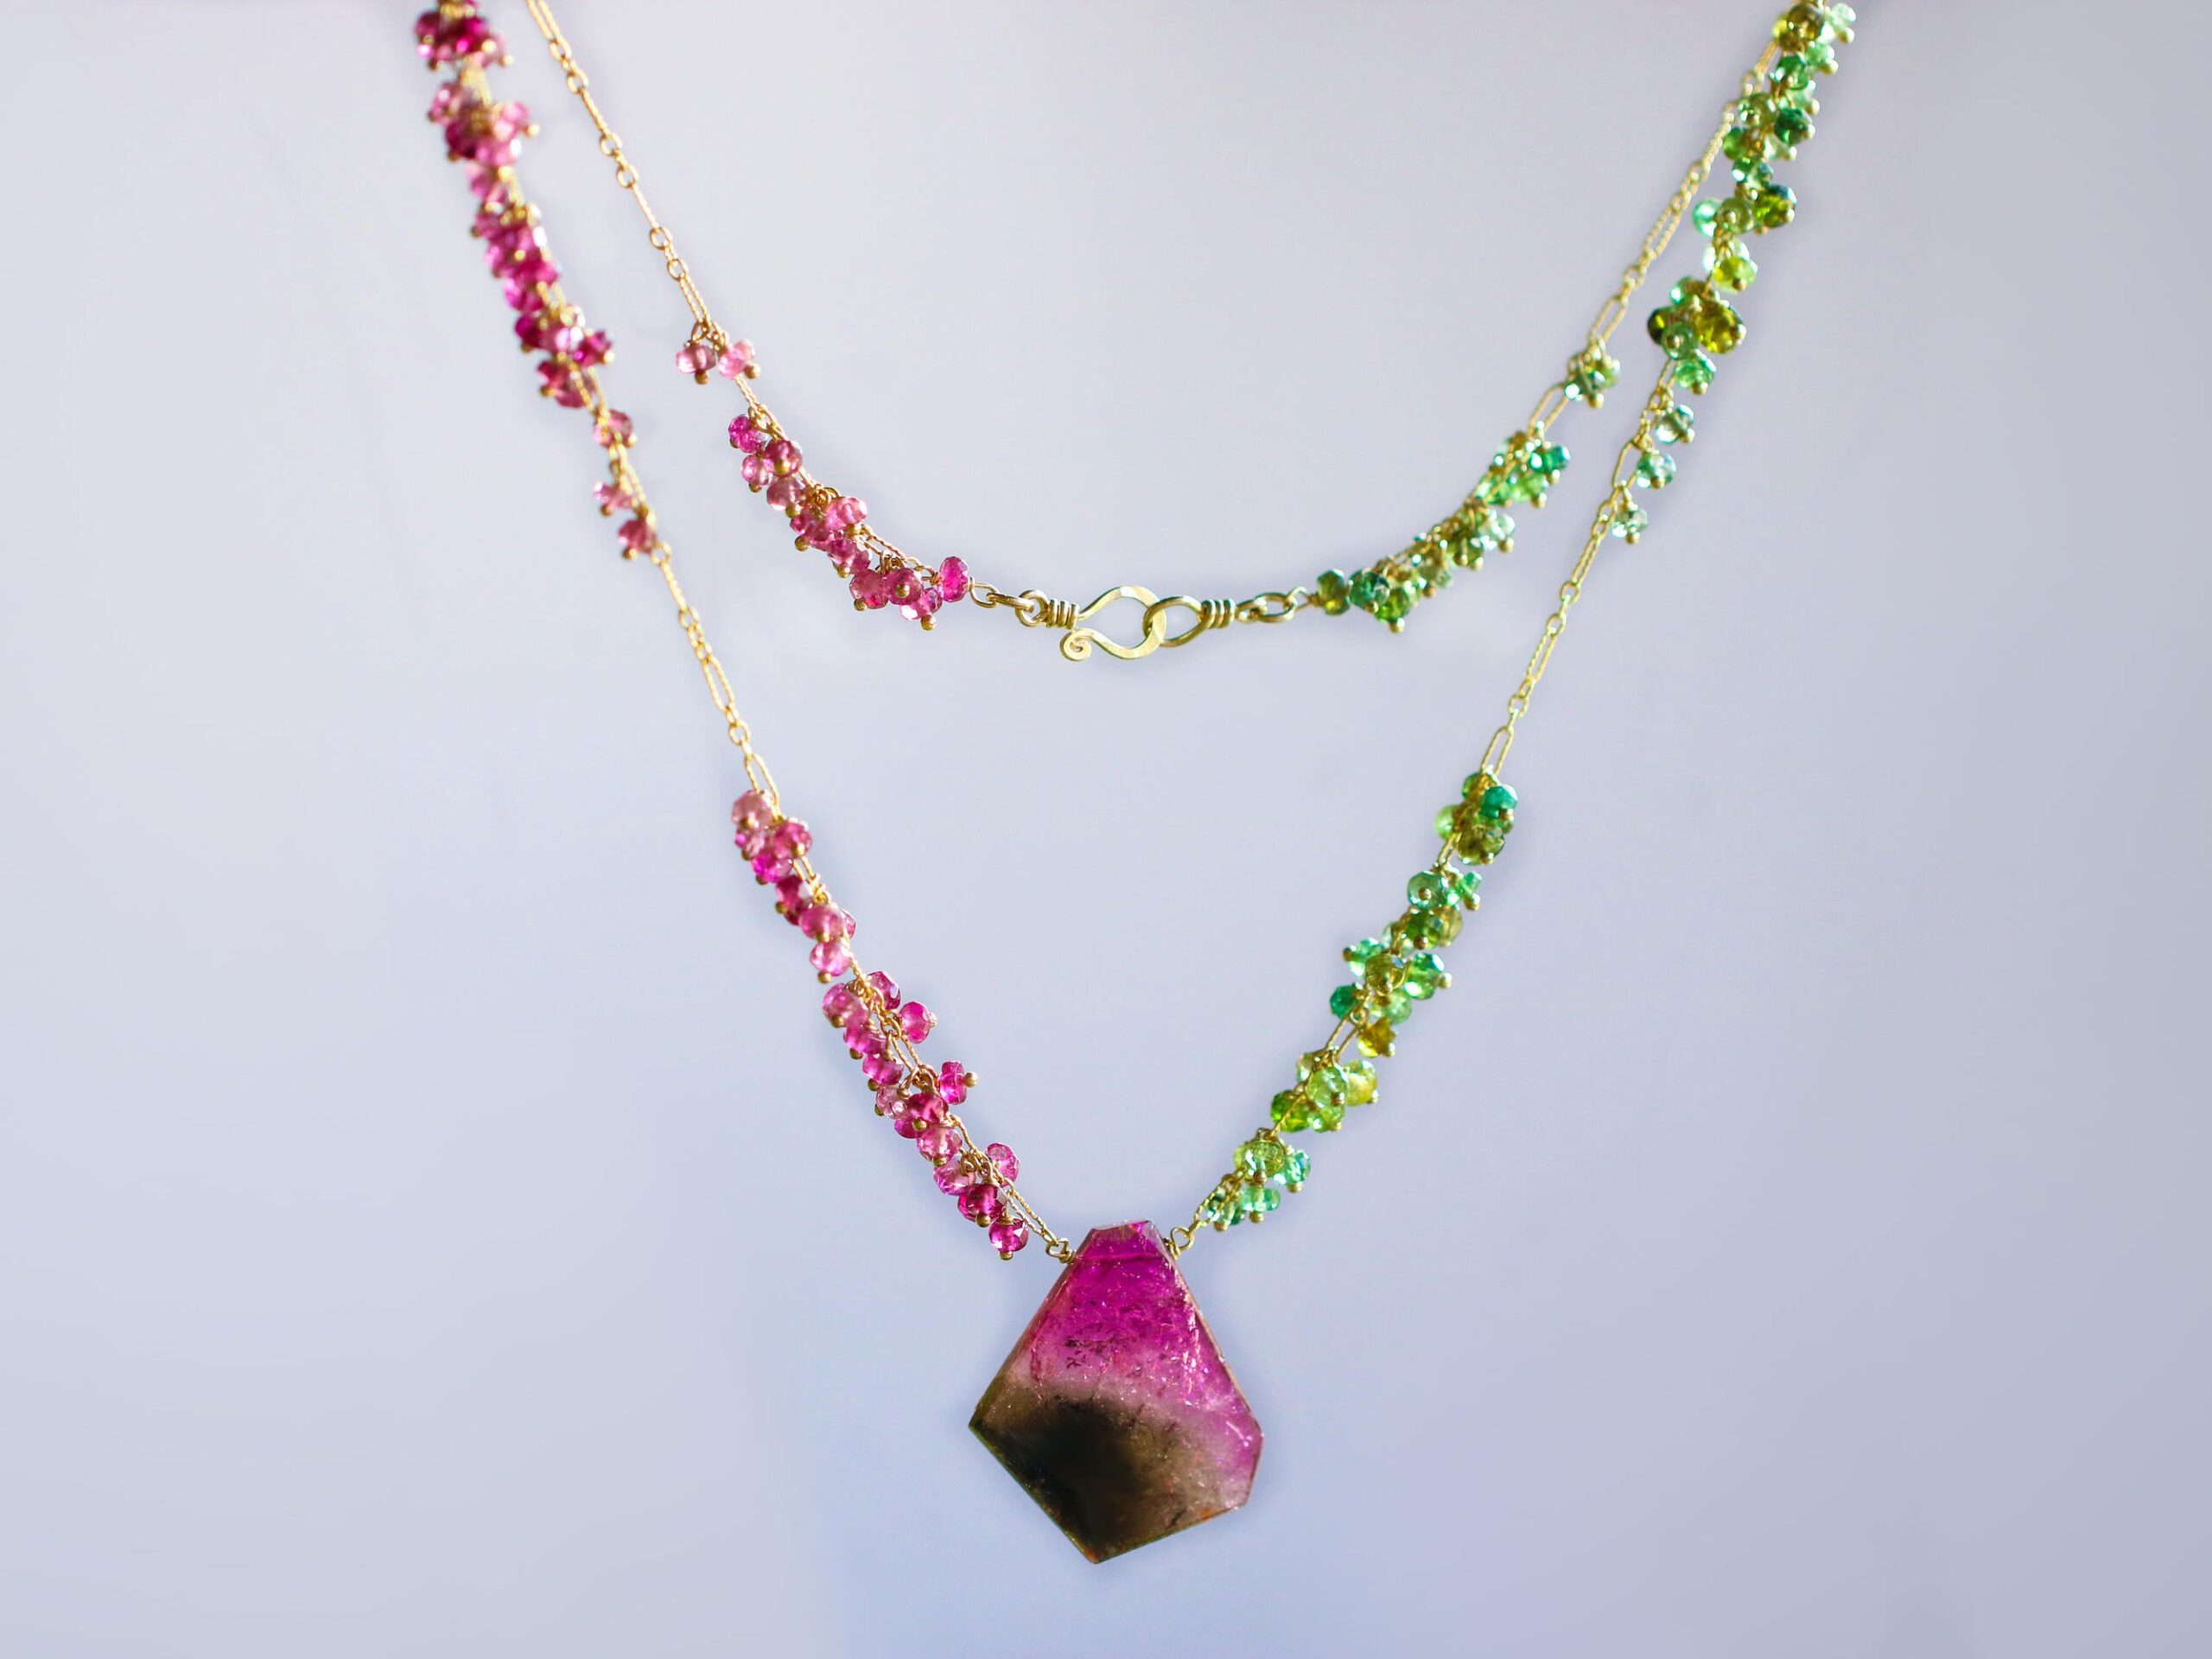 Watermelon Tourmaline Slice Necklace with Pink and Green Tourmaline, Statement Necklace One of a Kind